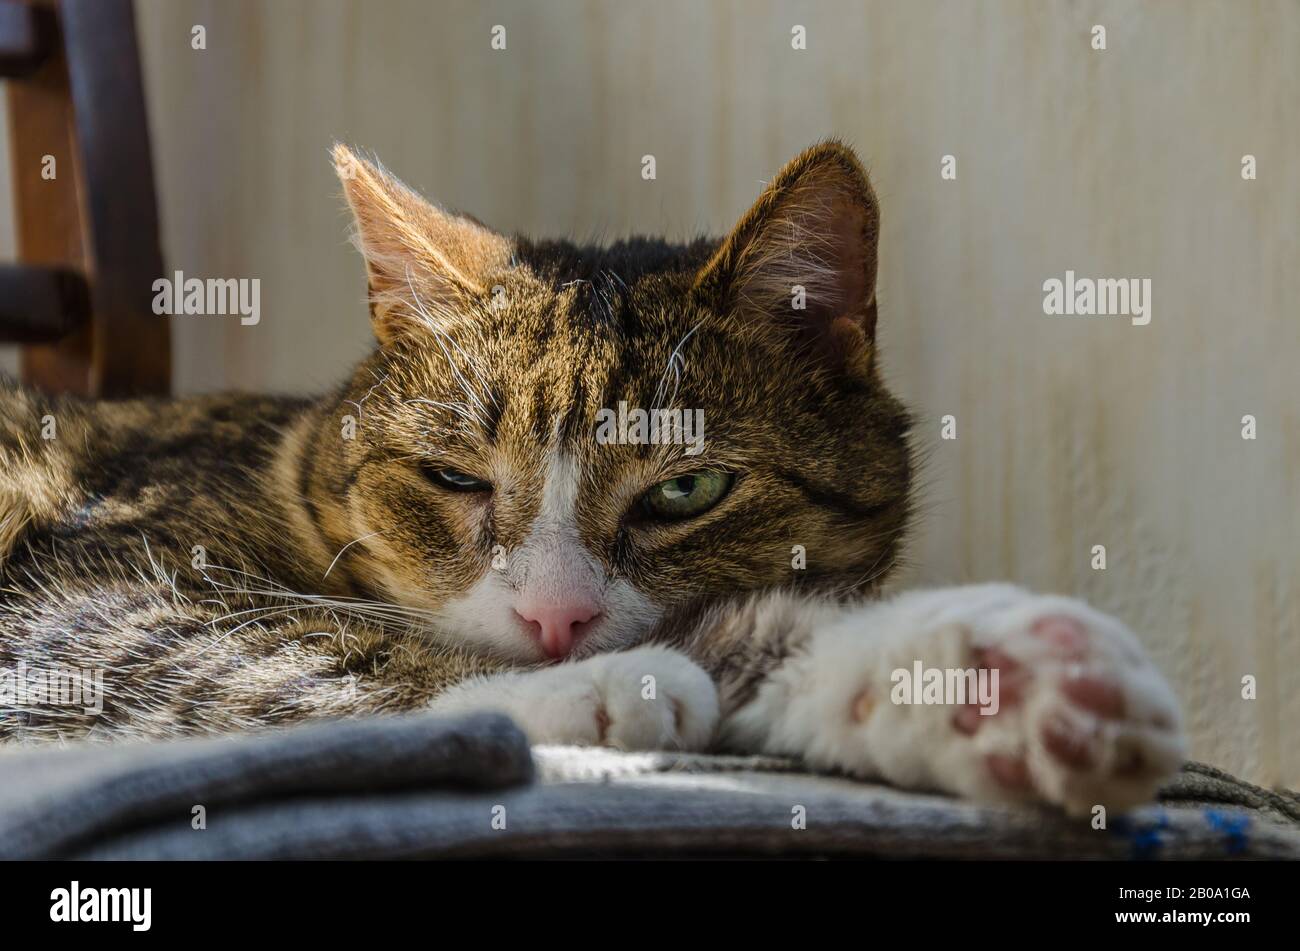 A tabby cat with a narrowed eye lies on a chair. Emotions of contempt, distrust, indifference. Stock Photo